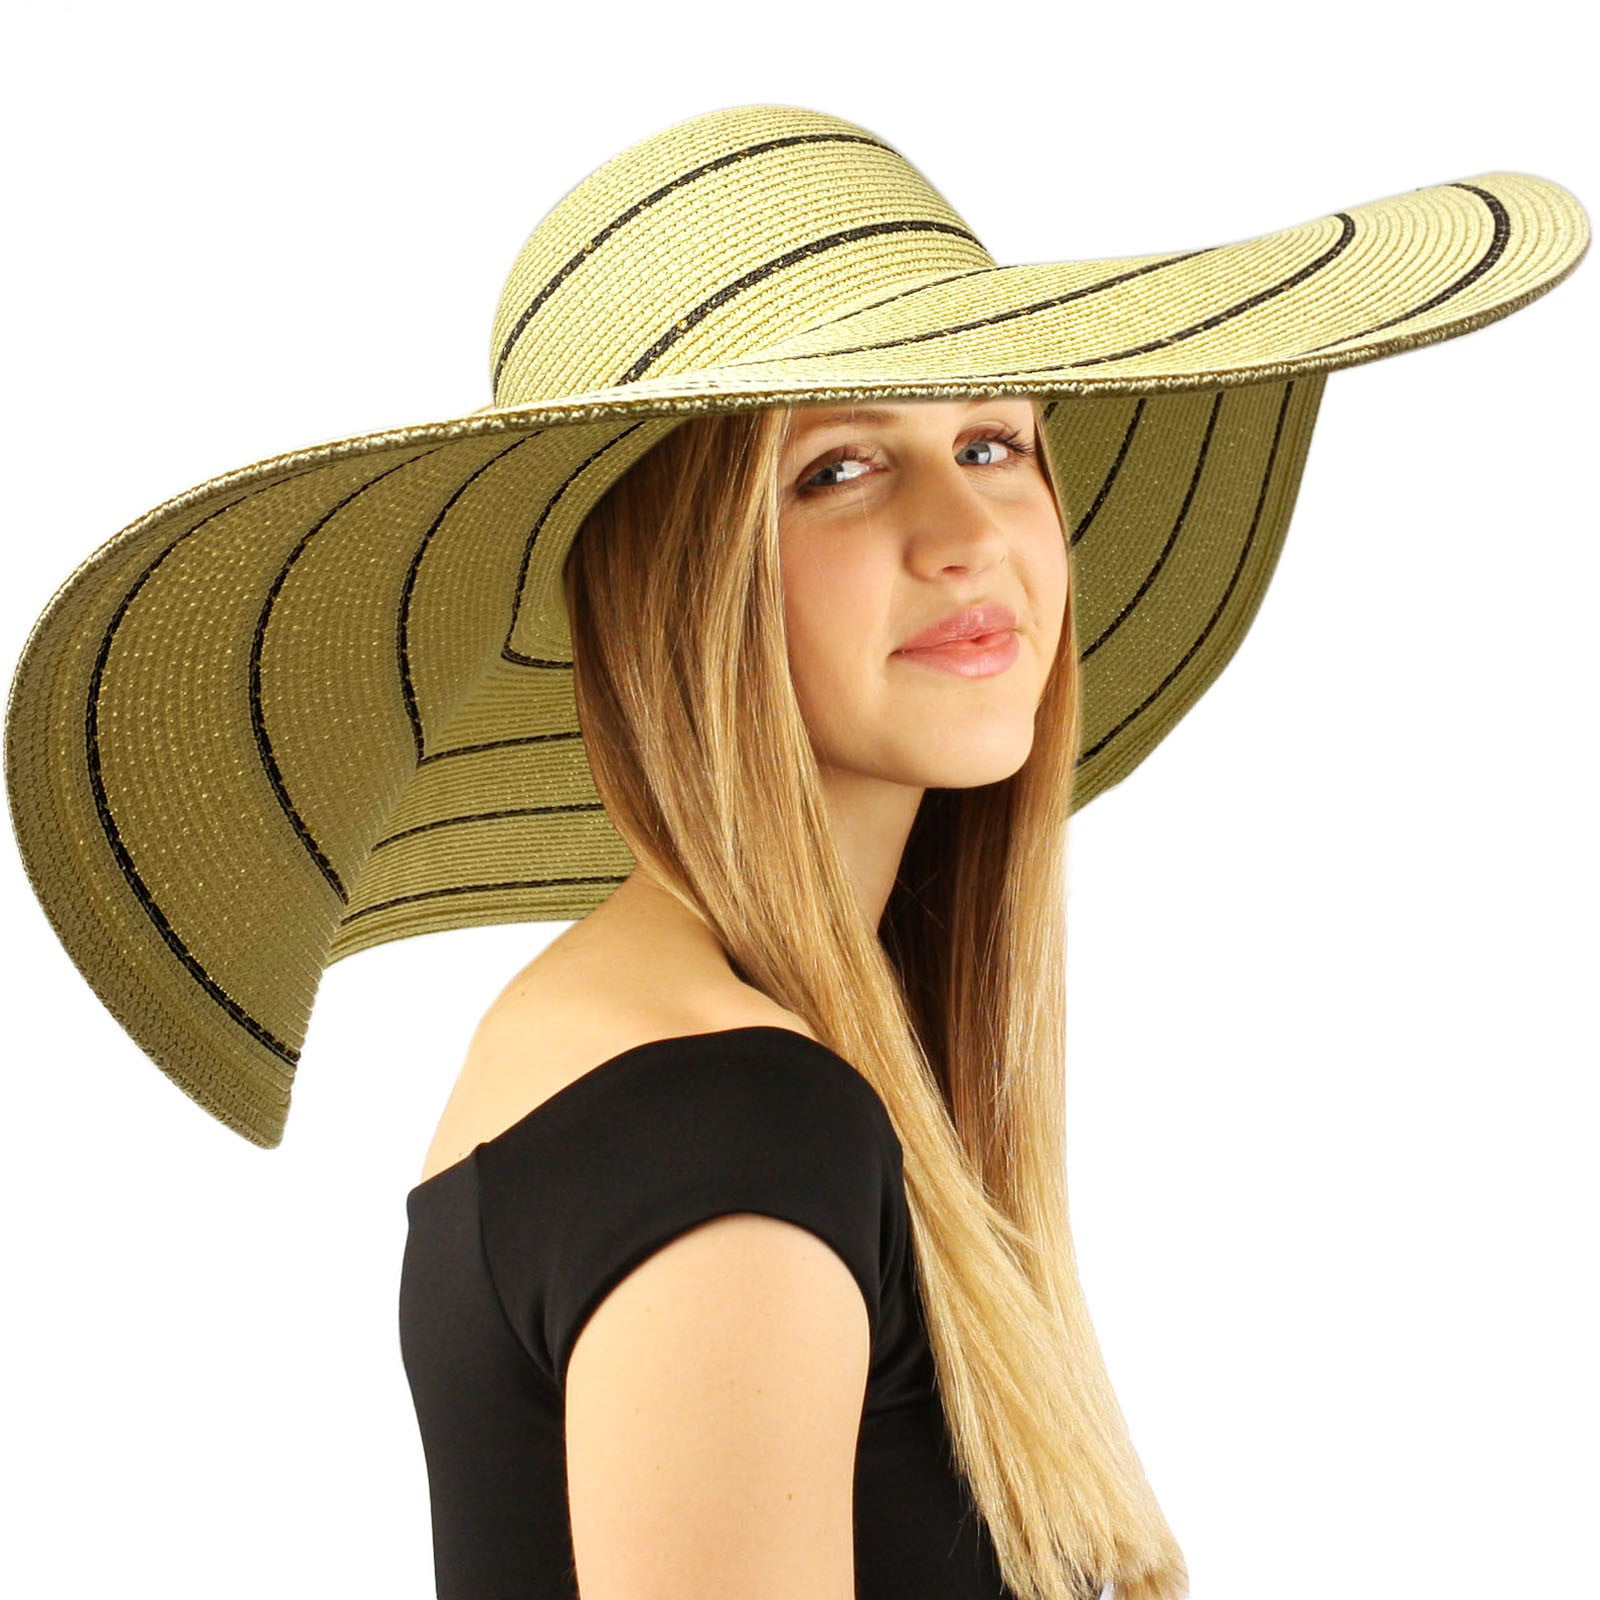 Sowift Women Sun Hats Floppy Summer Sun Beach Straw Hat UPF50 Foldable with Bowknot 